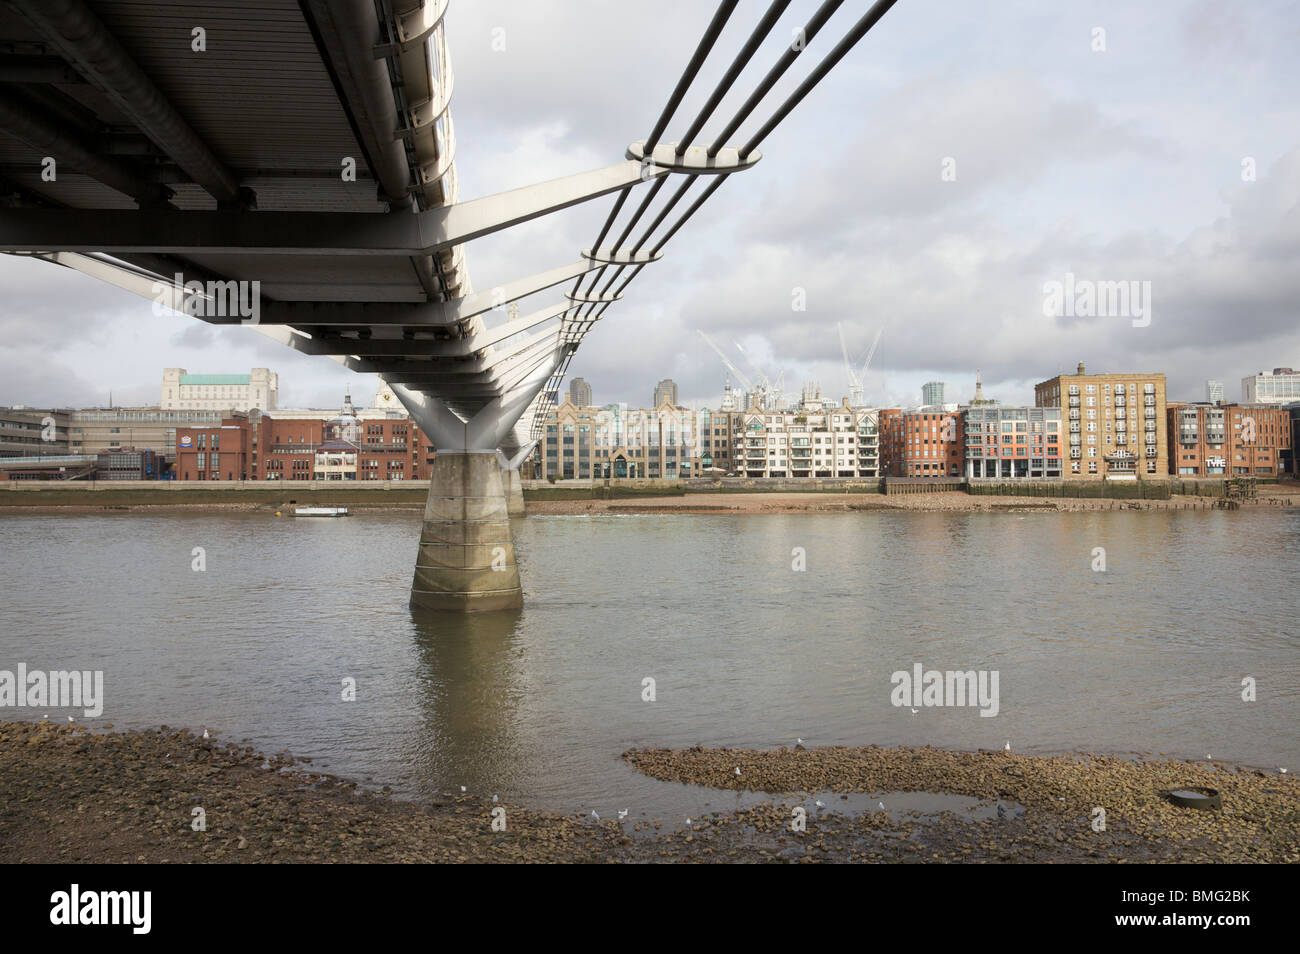 A view of the Millennium Bridge and River Thames, London. Stock Photo